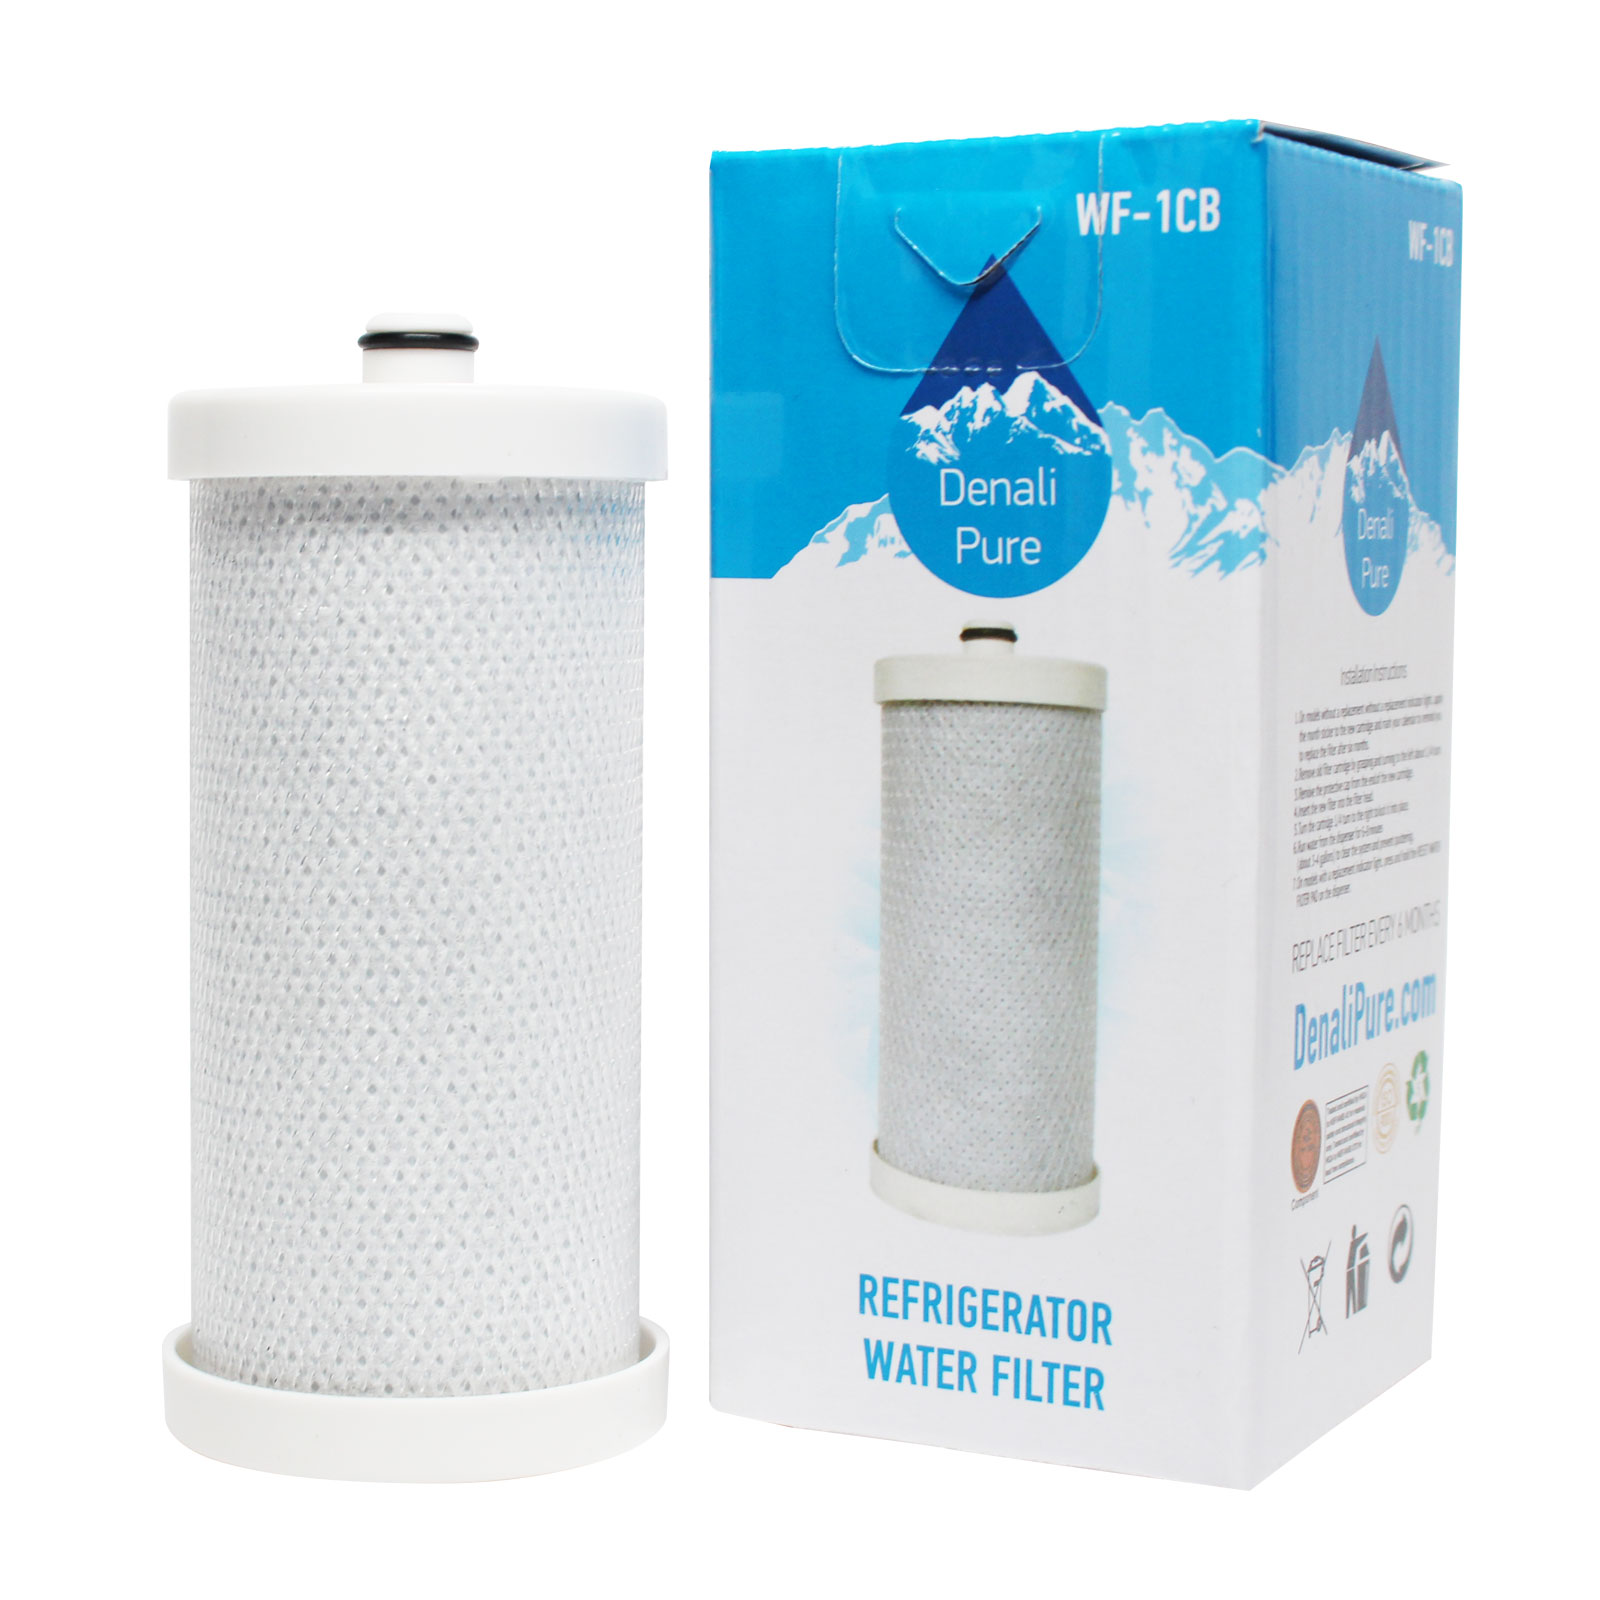 2-Pack Replacement for Frigidaire FRS6KR5JSB4 Refrigerator Water Filter - Compatible with Frigidaire WF1CB, WFCB Fridge Water Filter Cartridge - image 2 of 4